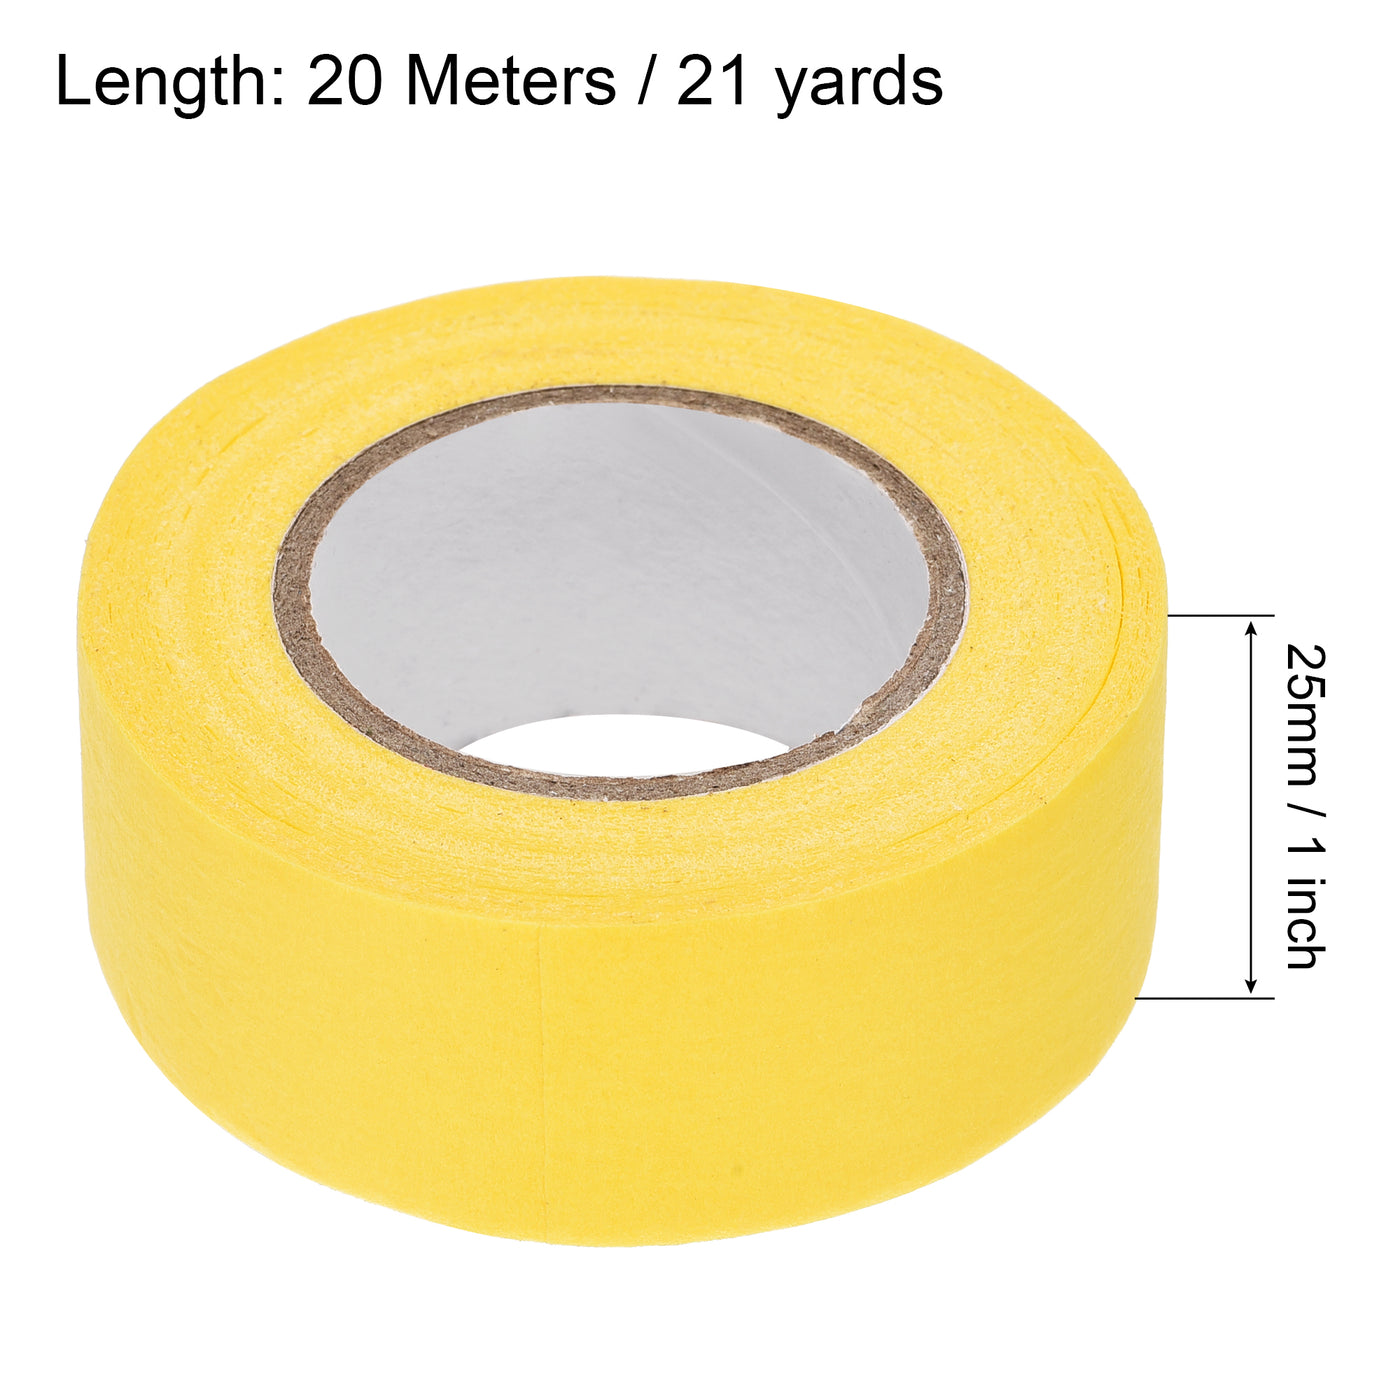 uxcell Uxcell 3Pcs 25mm 1 inch Wide 20m 21 Yards Masking Tape Painters Tape Rolls Yellow